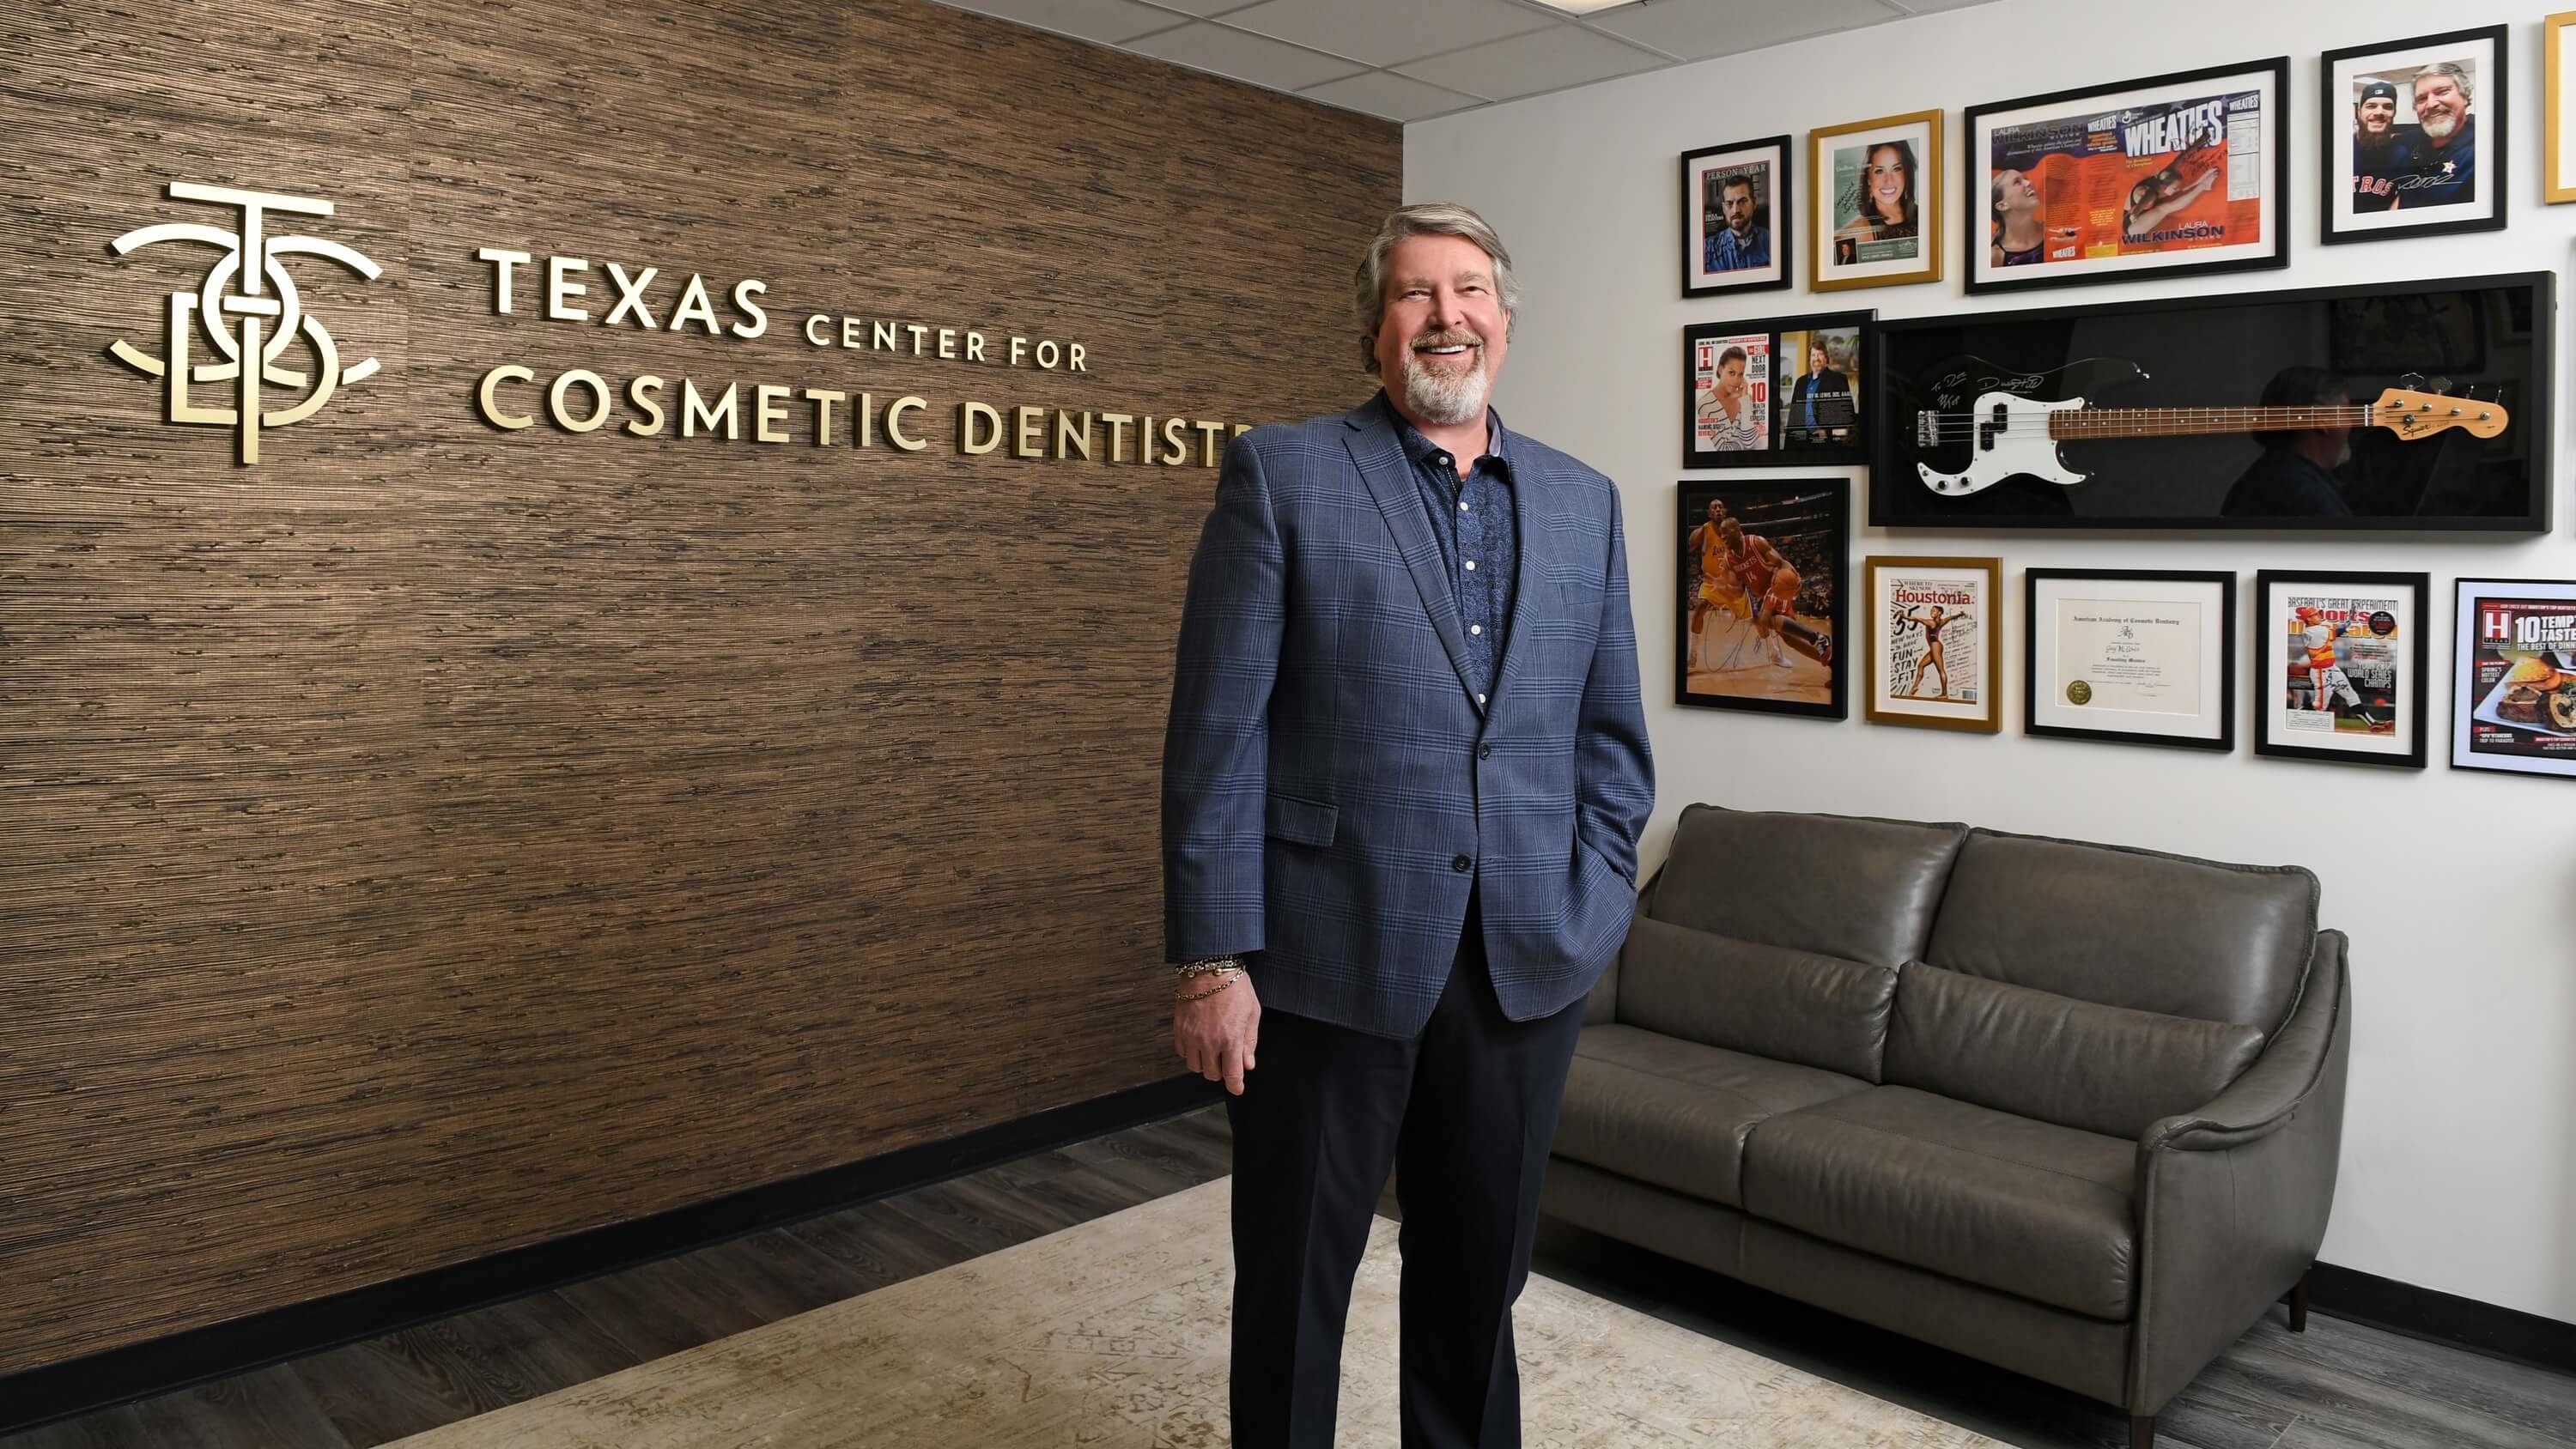 The Texas Center for Cosmetic 